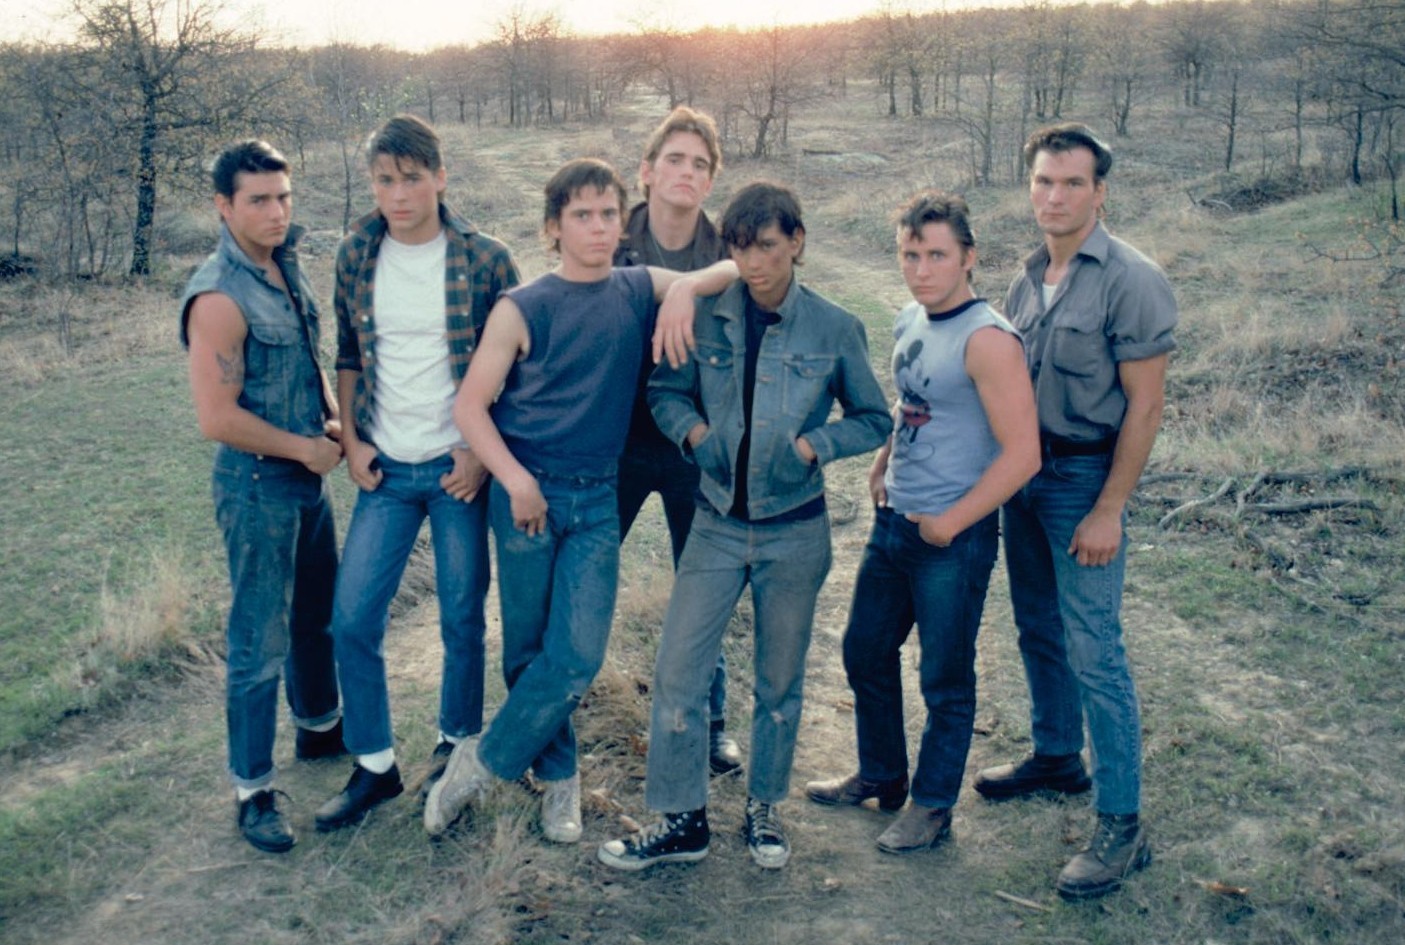 Greasers   The Outsiders Photo  17516515    Fanpop